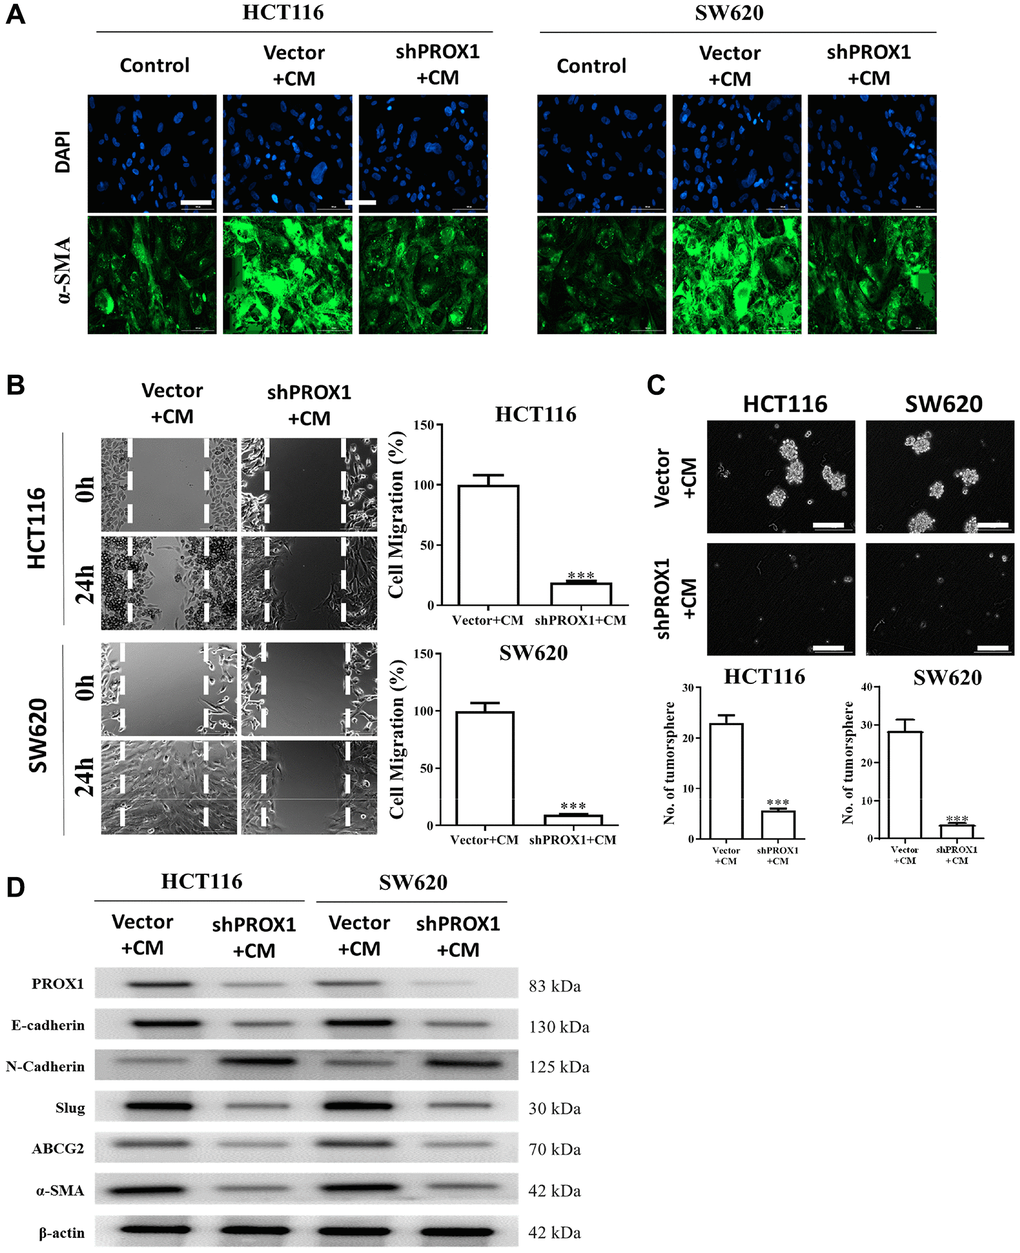 PROX1 inhibition prevented cancer-associated fibroblast (CAF) transformation. (A) Representative immunofluorescence images of CAFs transformed by PROX1 inhibition in HCT116 and SW620 cells. Reduced expression of alpha-smooth muscle actin (α-SMA) was observed. PROX1-inhibited cells in the presence of condition medium (CM) showed reduced migratory (B) and tumor sphere-generating abilities (C). (D) Western blot analysis demonstrated the expressions of the oncogenic markers, stemness markers, CAFs markers (α-SMA), and PROX1, in PROX1-inhibited and control samples under the influence of CM. *p **p ***p 